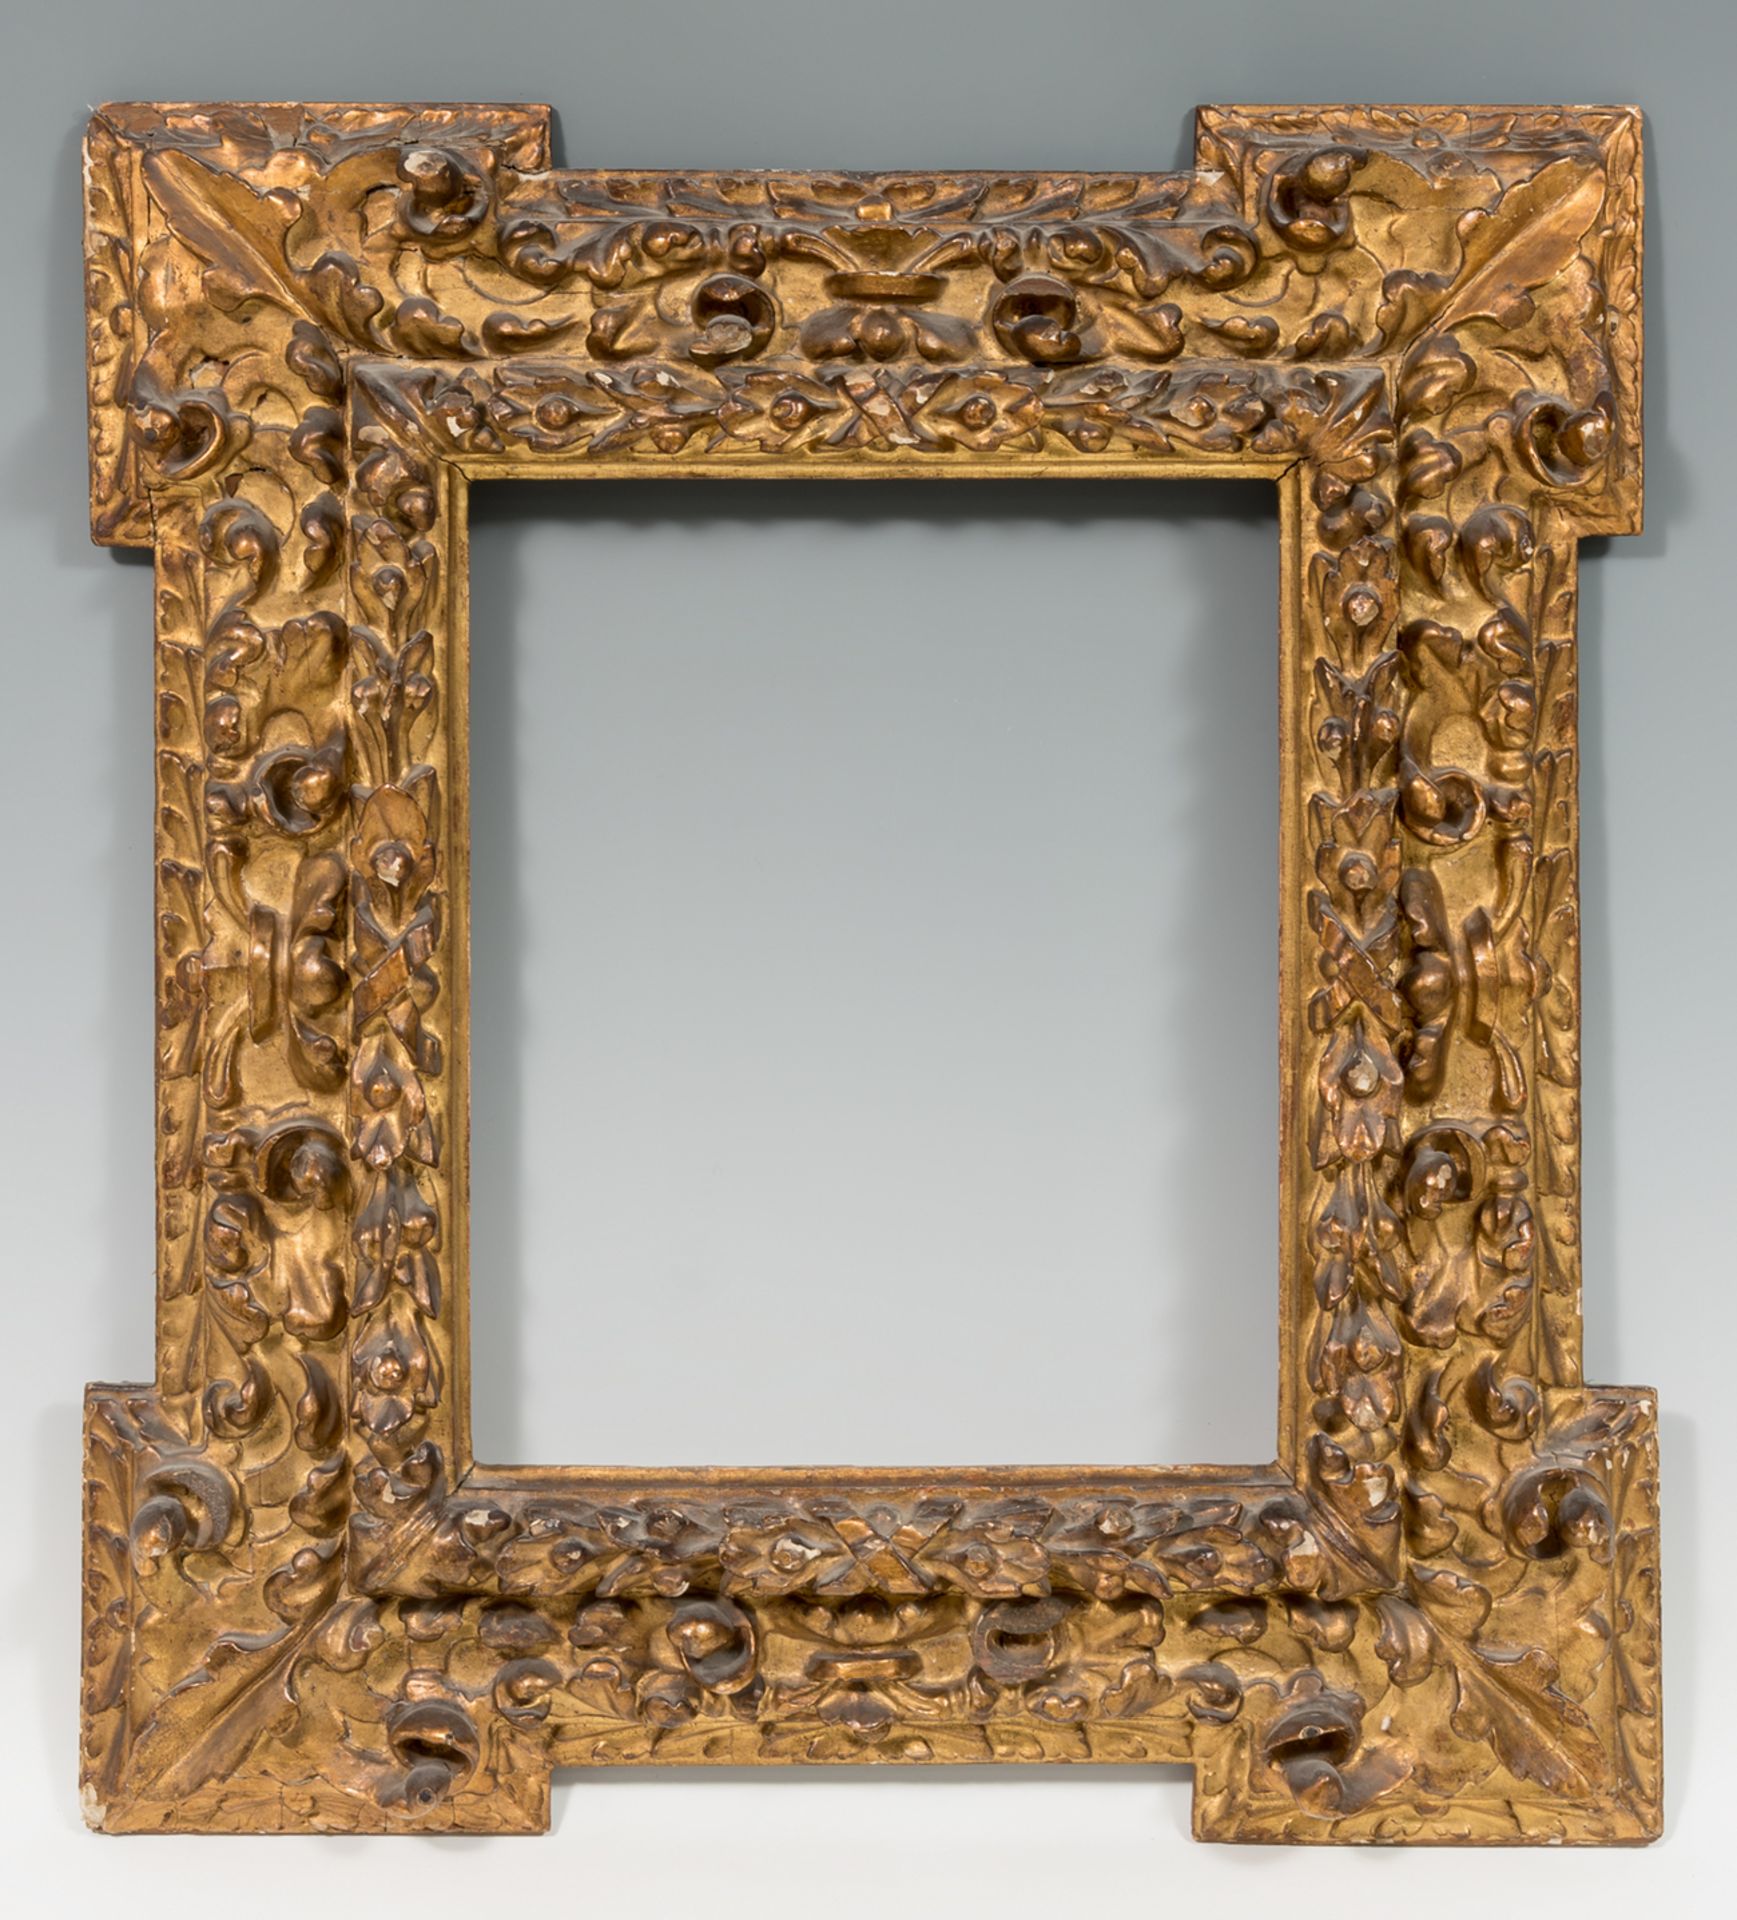 Frame; Spain, second half of the 17th century.Wood found and gilded with fine gold.Measurements;